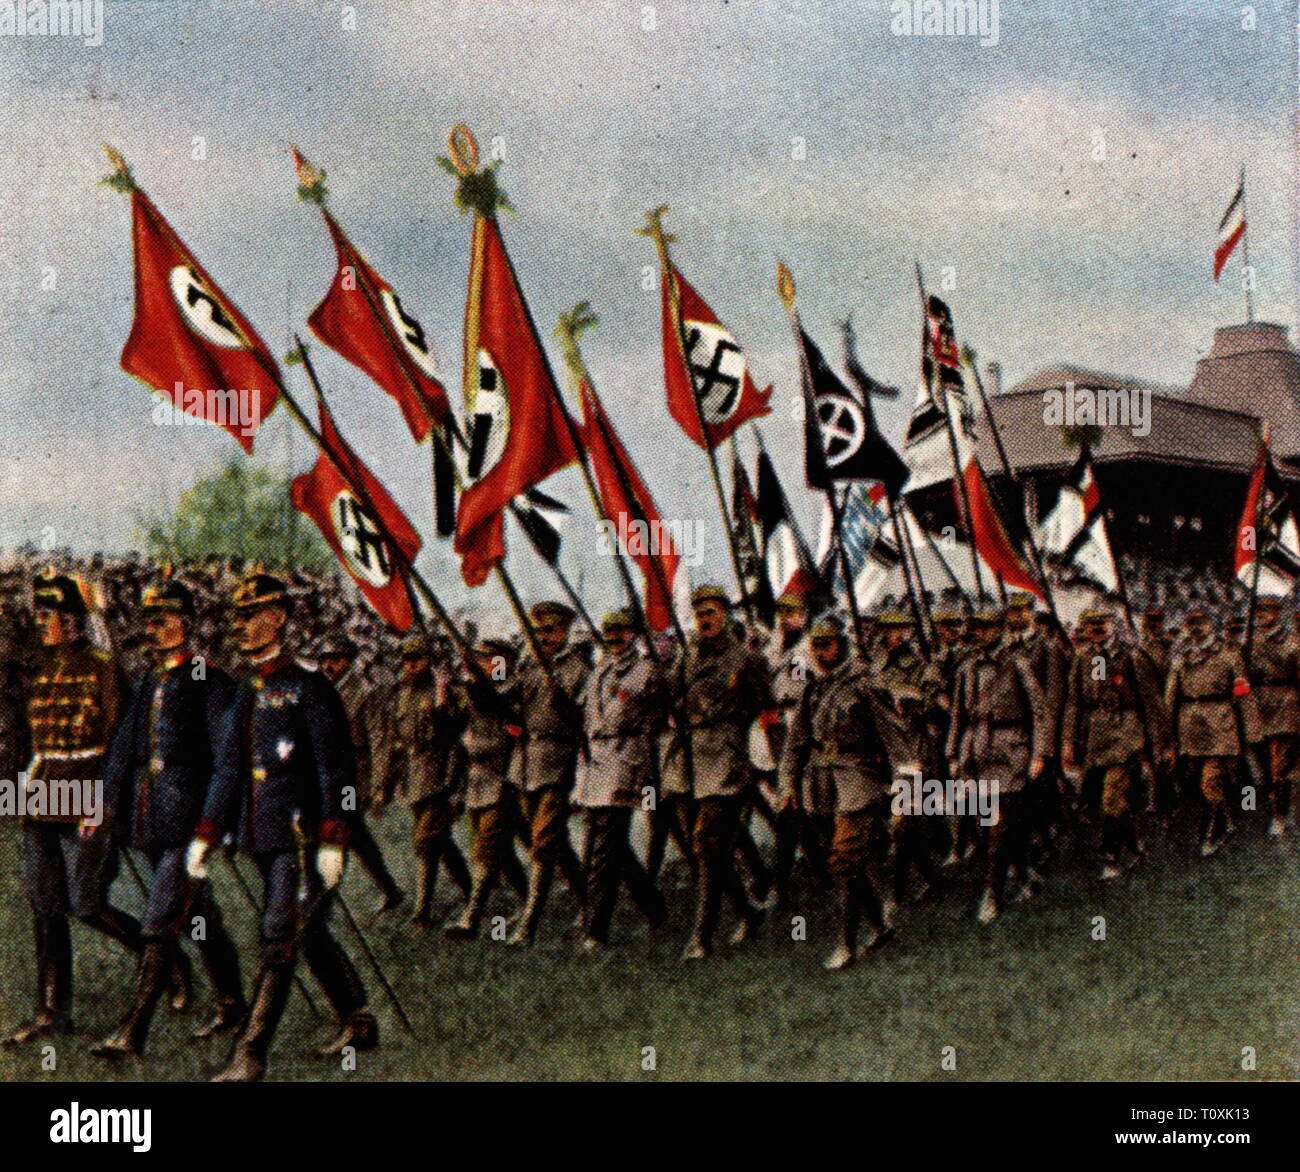 politics, political event, Deutscher Tag (German Day), Halle, 11.5.1924, procession of the flags of the national associations, coloured photograph, cigarette card, series 'Die Nachkriegszeit', 1935, National Socialists, NSDAP, Racial, Stahlhelm, right wing extremist, assembly, people, German Reich, Weimar Republic, Germany, 1920s, 20th century, politics, policy, event, events, day, days, procession, parade, processions, parades, flags, flag, association, associations, coloured, colored, post war period, post-war period, post-war years, post-war e, Additional-Rights-Clearance-Info-Not-Available Stock Photo